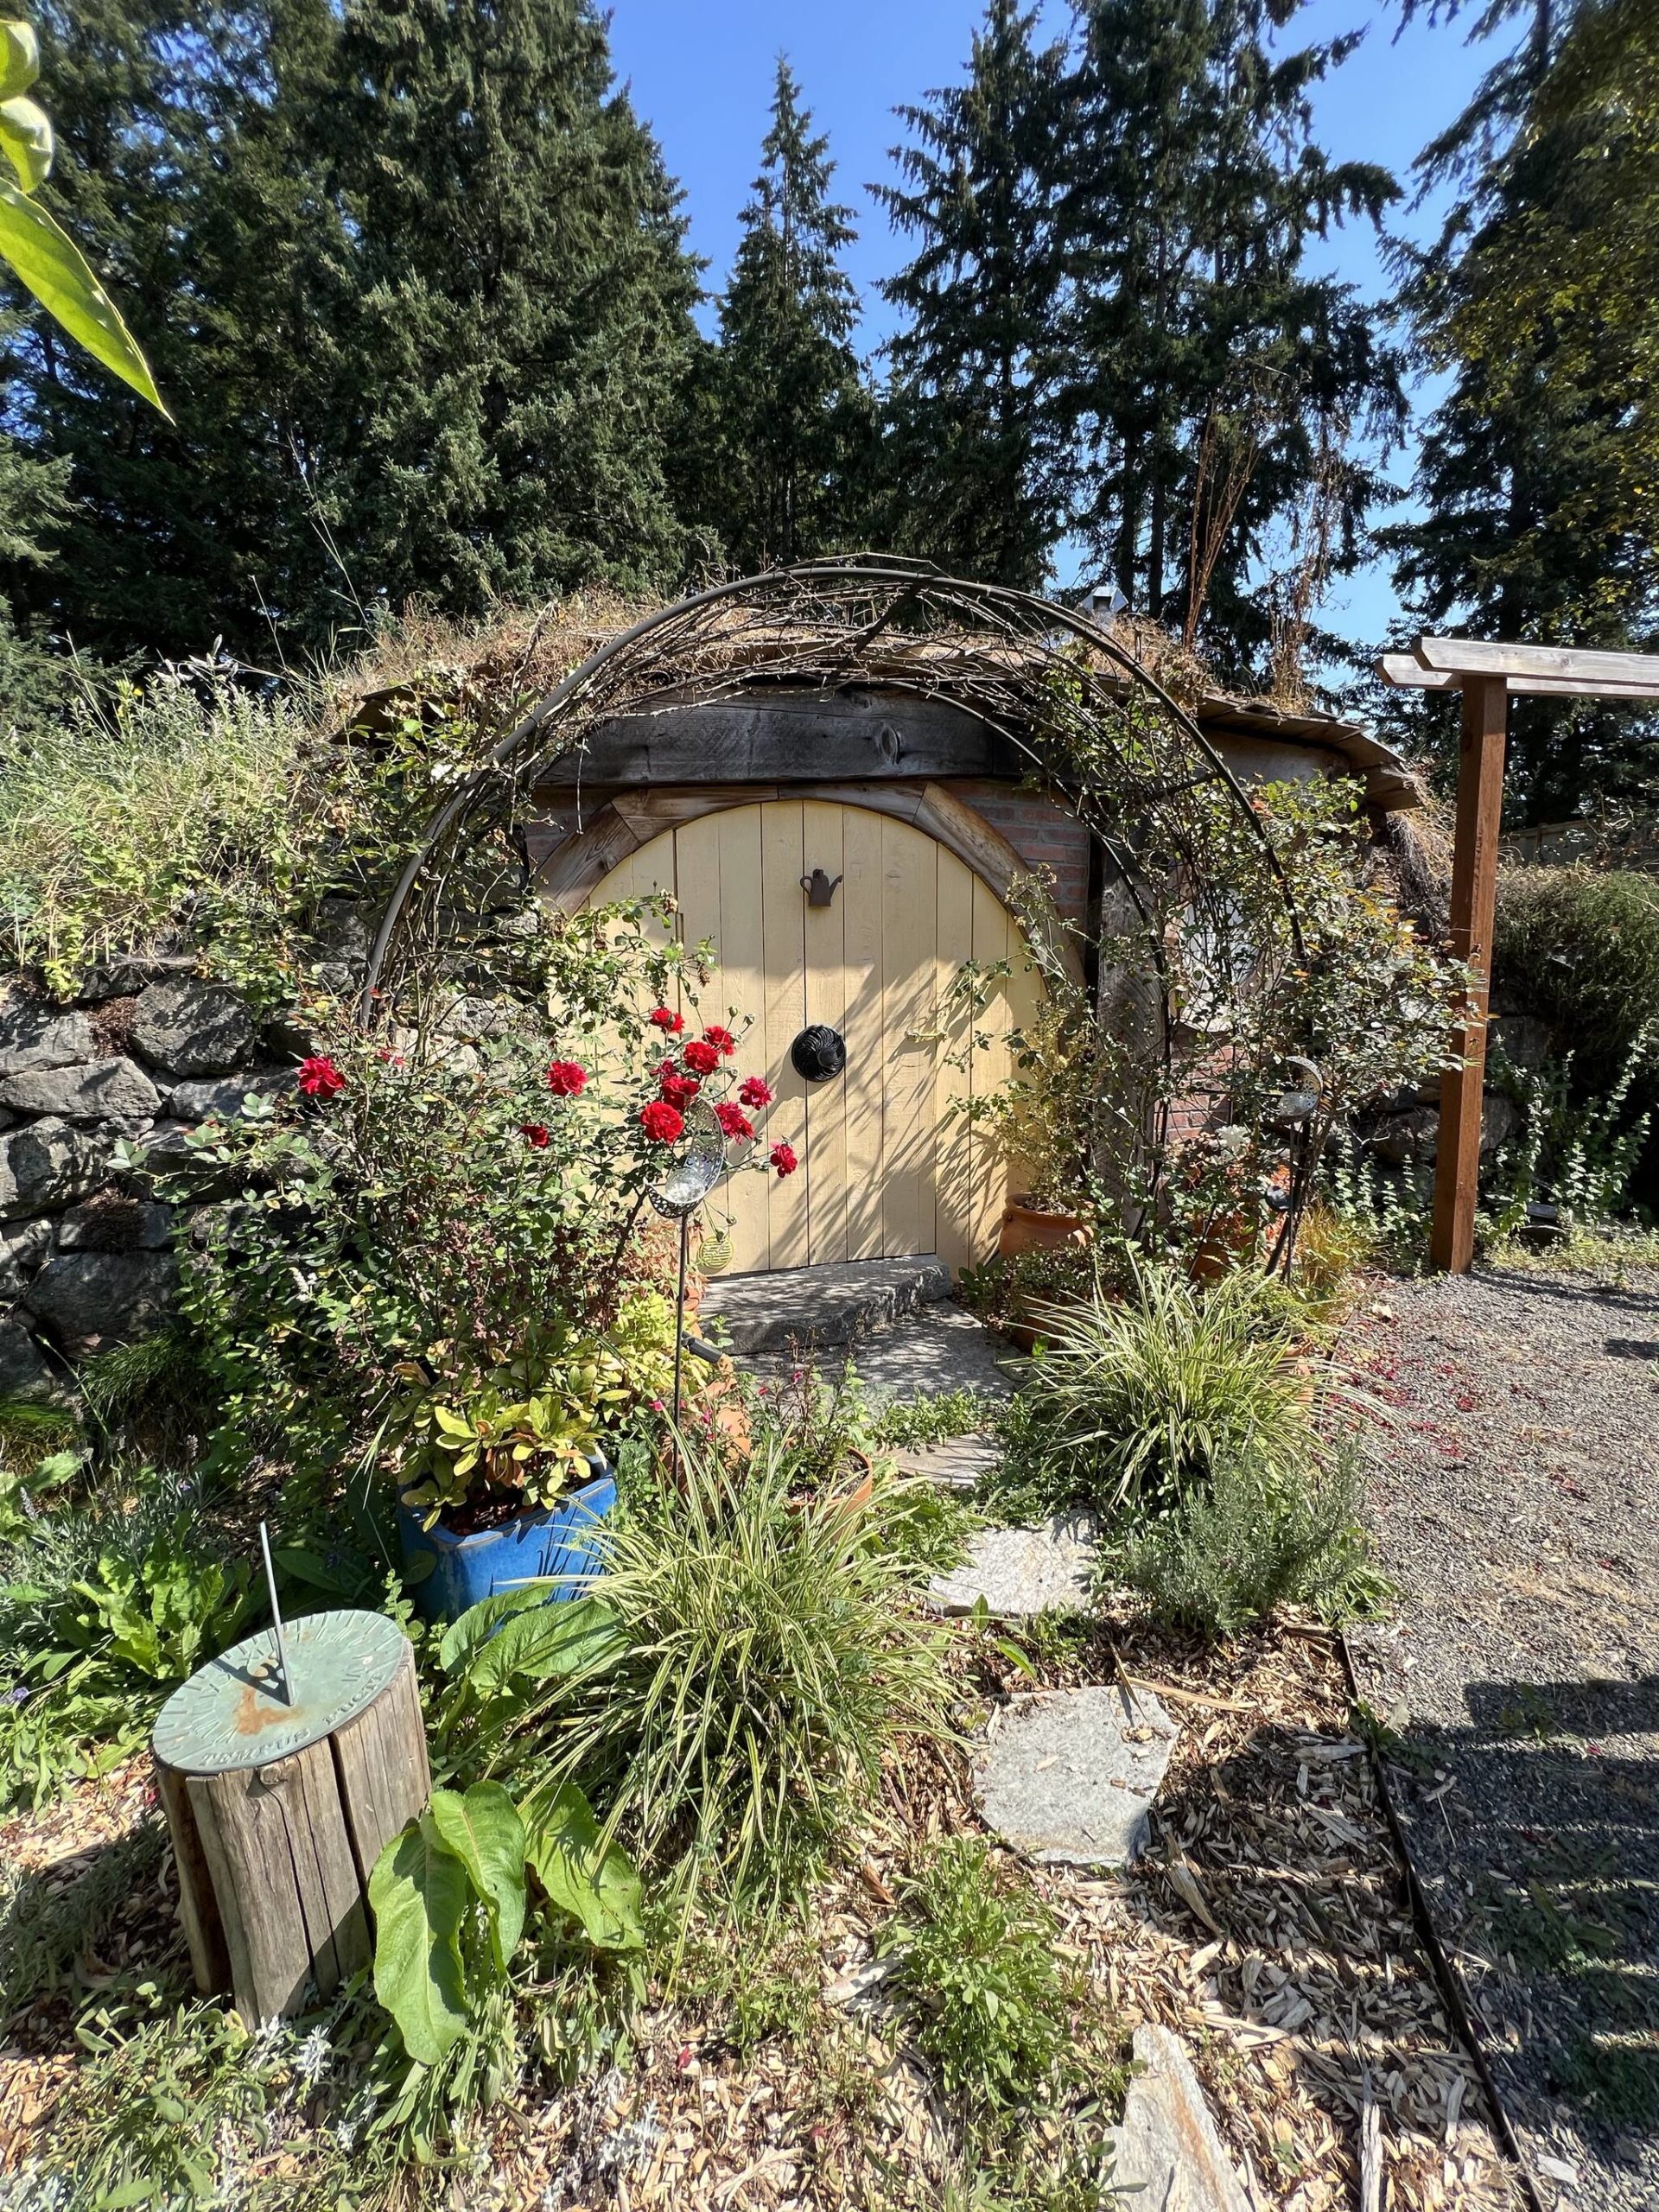 A hobbit house draws much attention and is located near the main house.